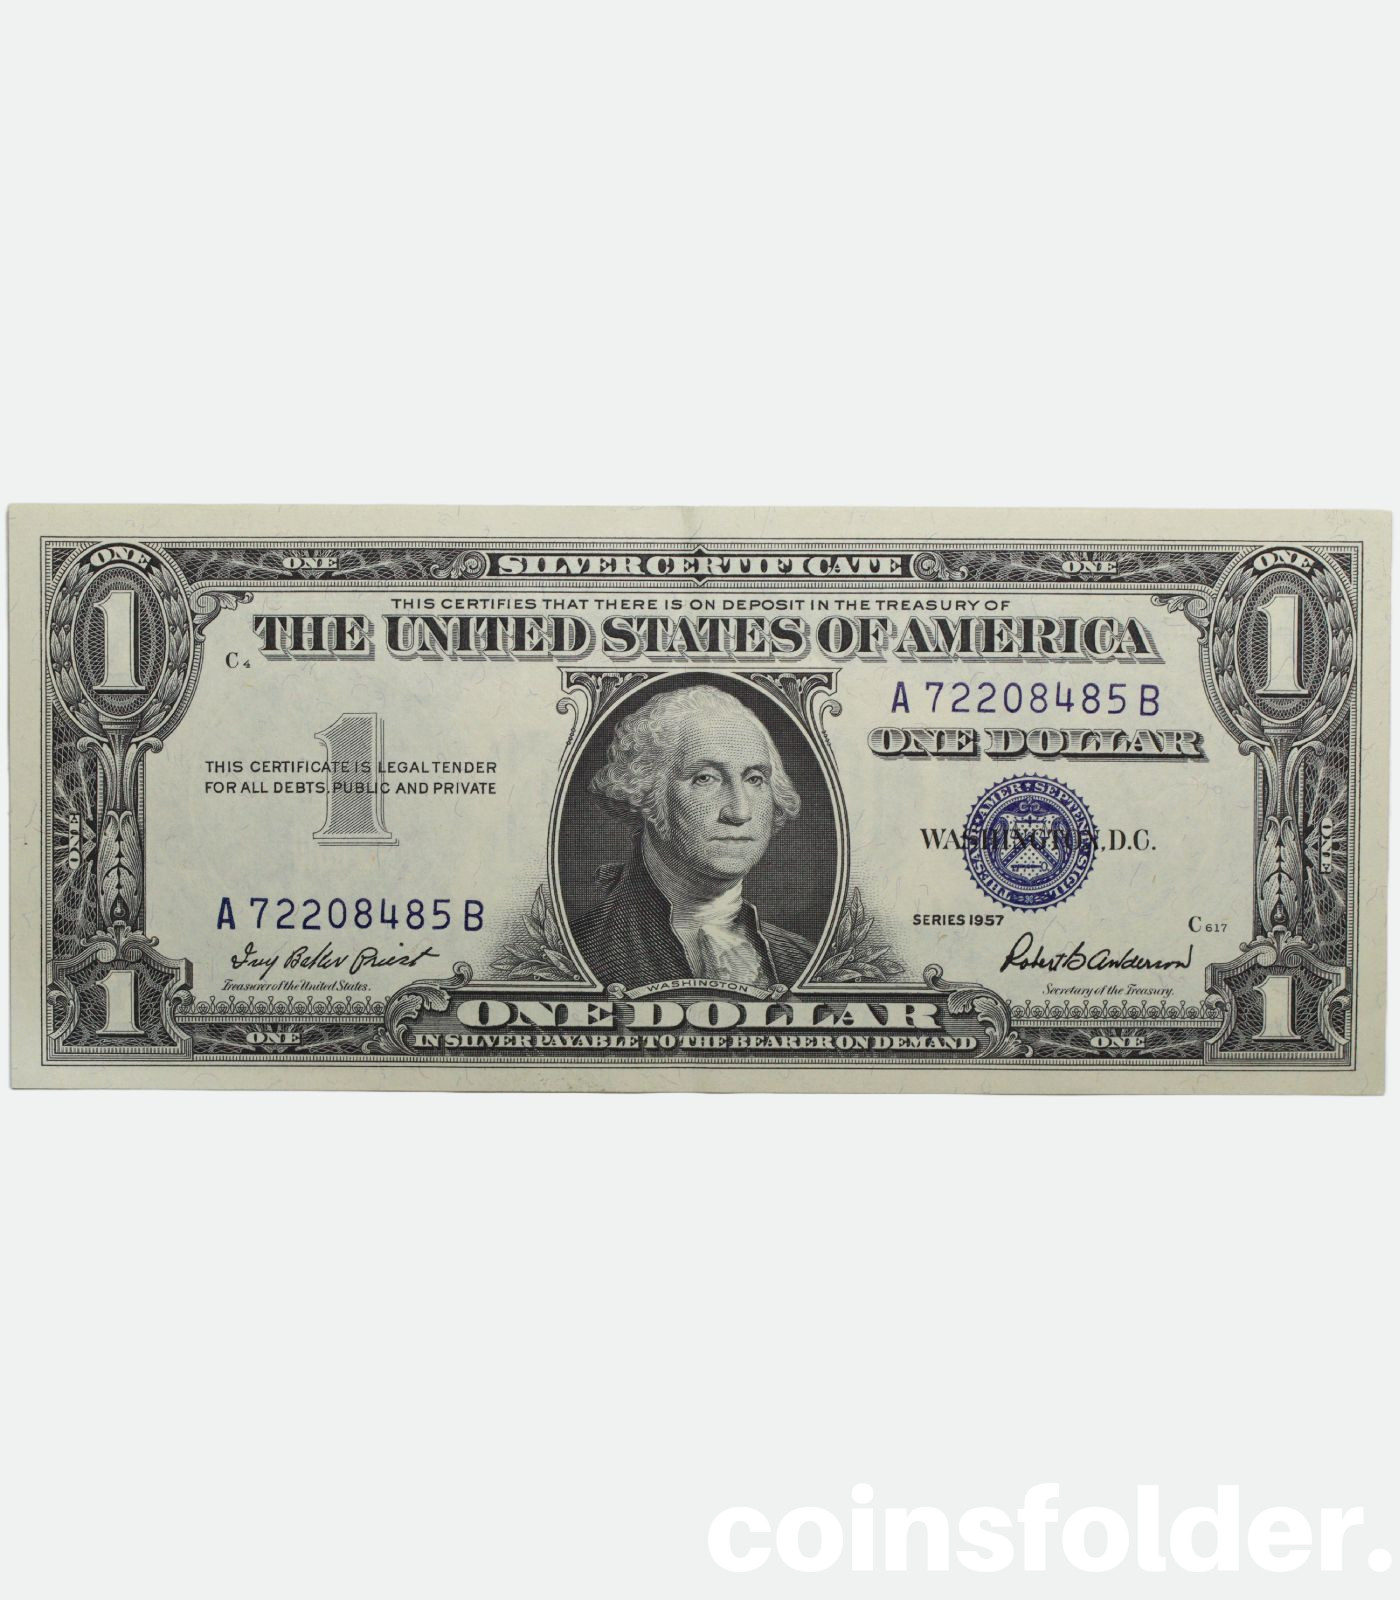 Set of 2 1957 USA 1 Dollar Silver Certificate, Consecutive number, Blue Seal, UNC